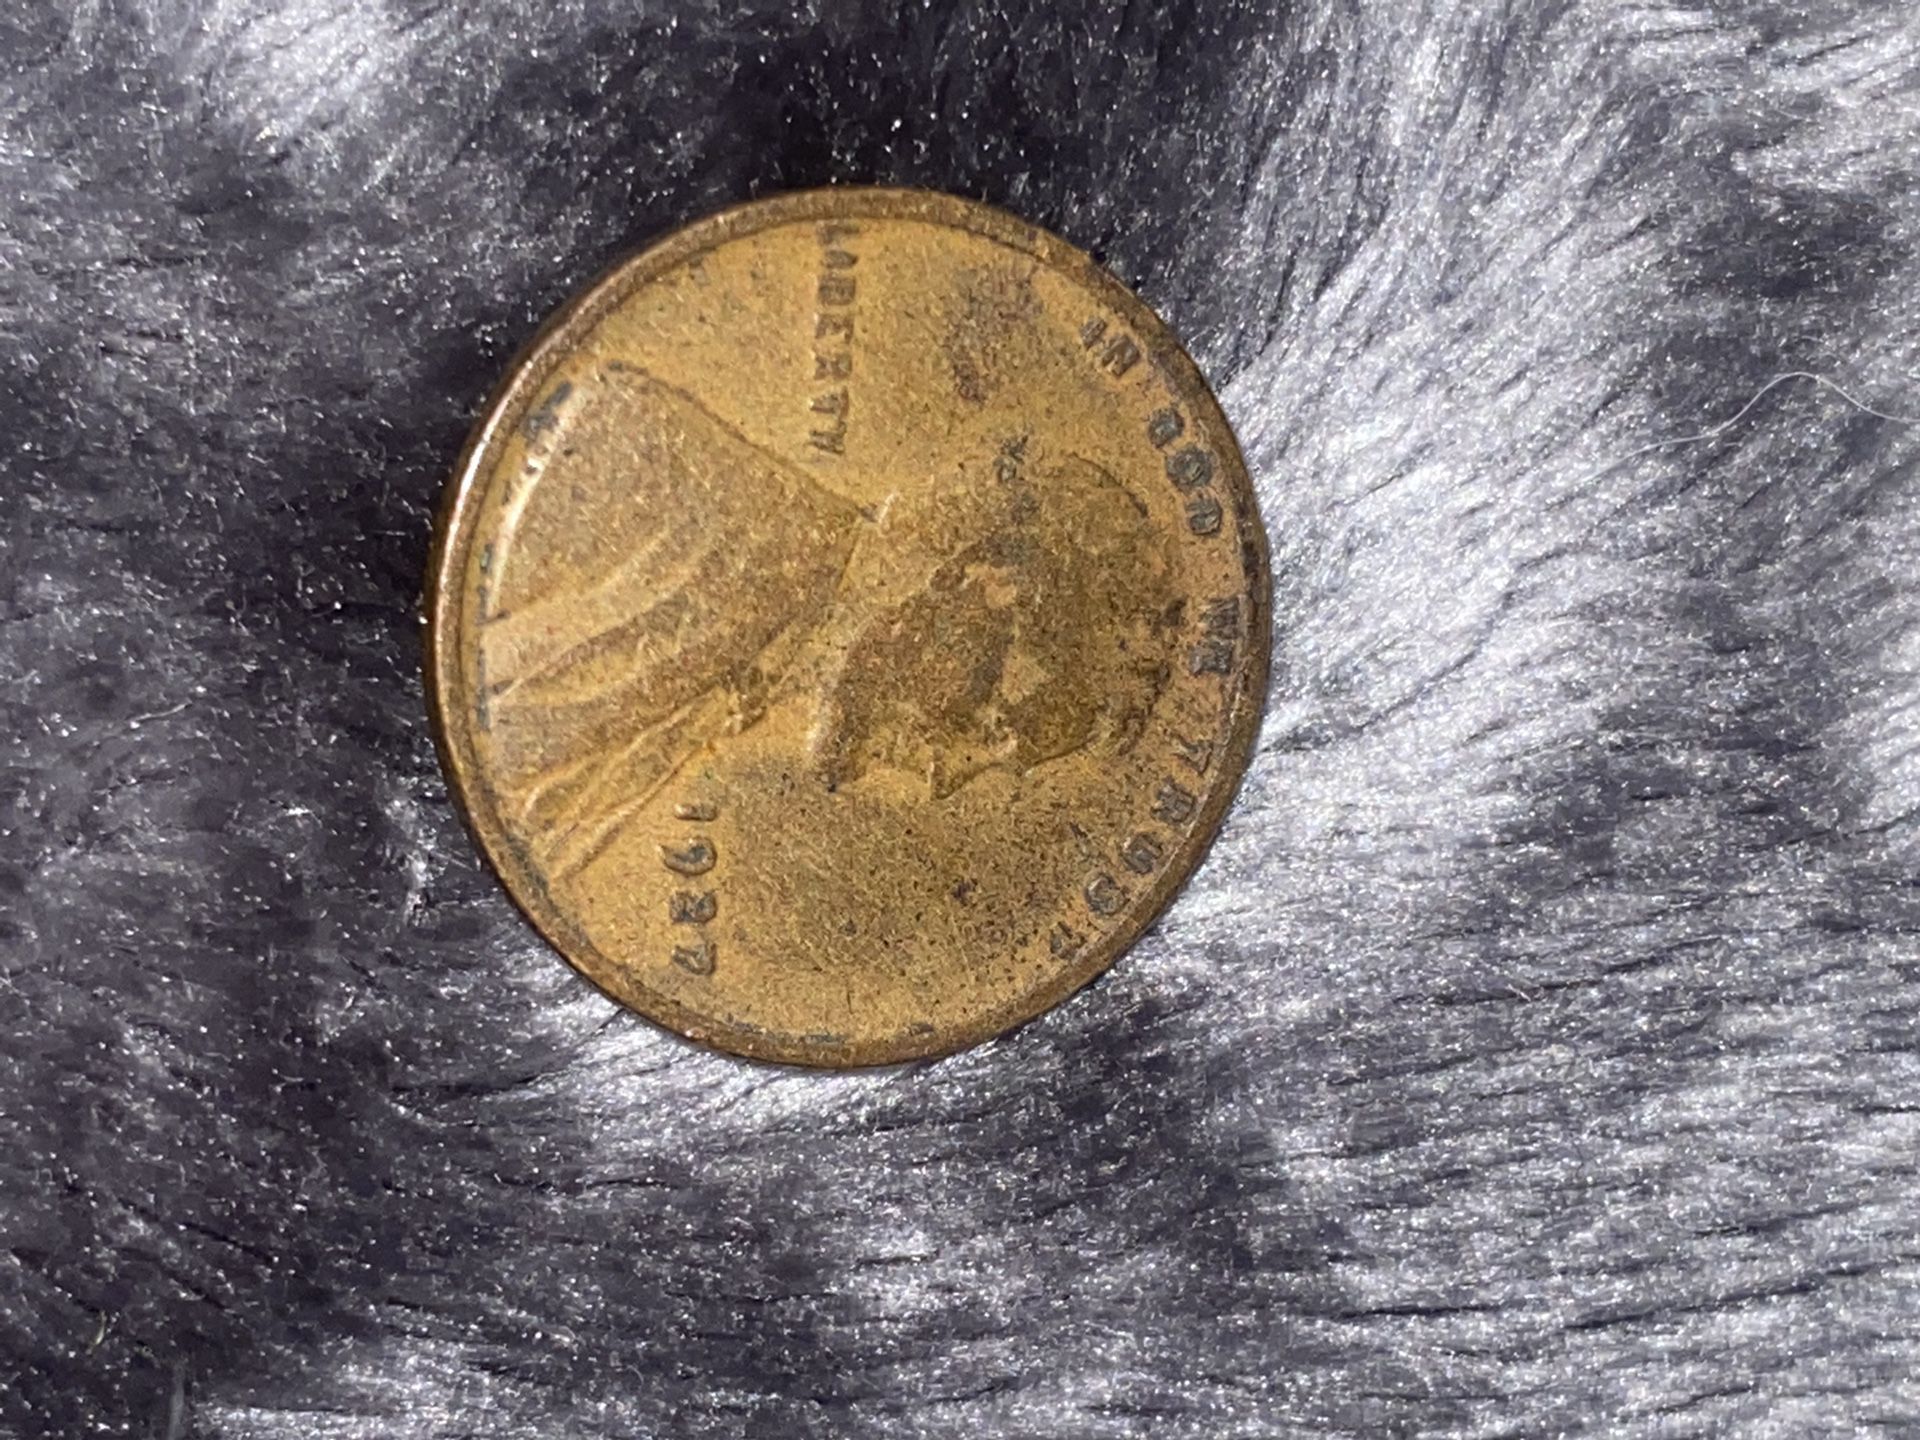 1927 Lincoln Wheat Cent Penny Coin 